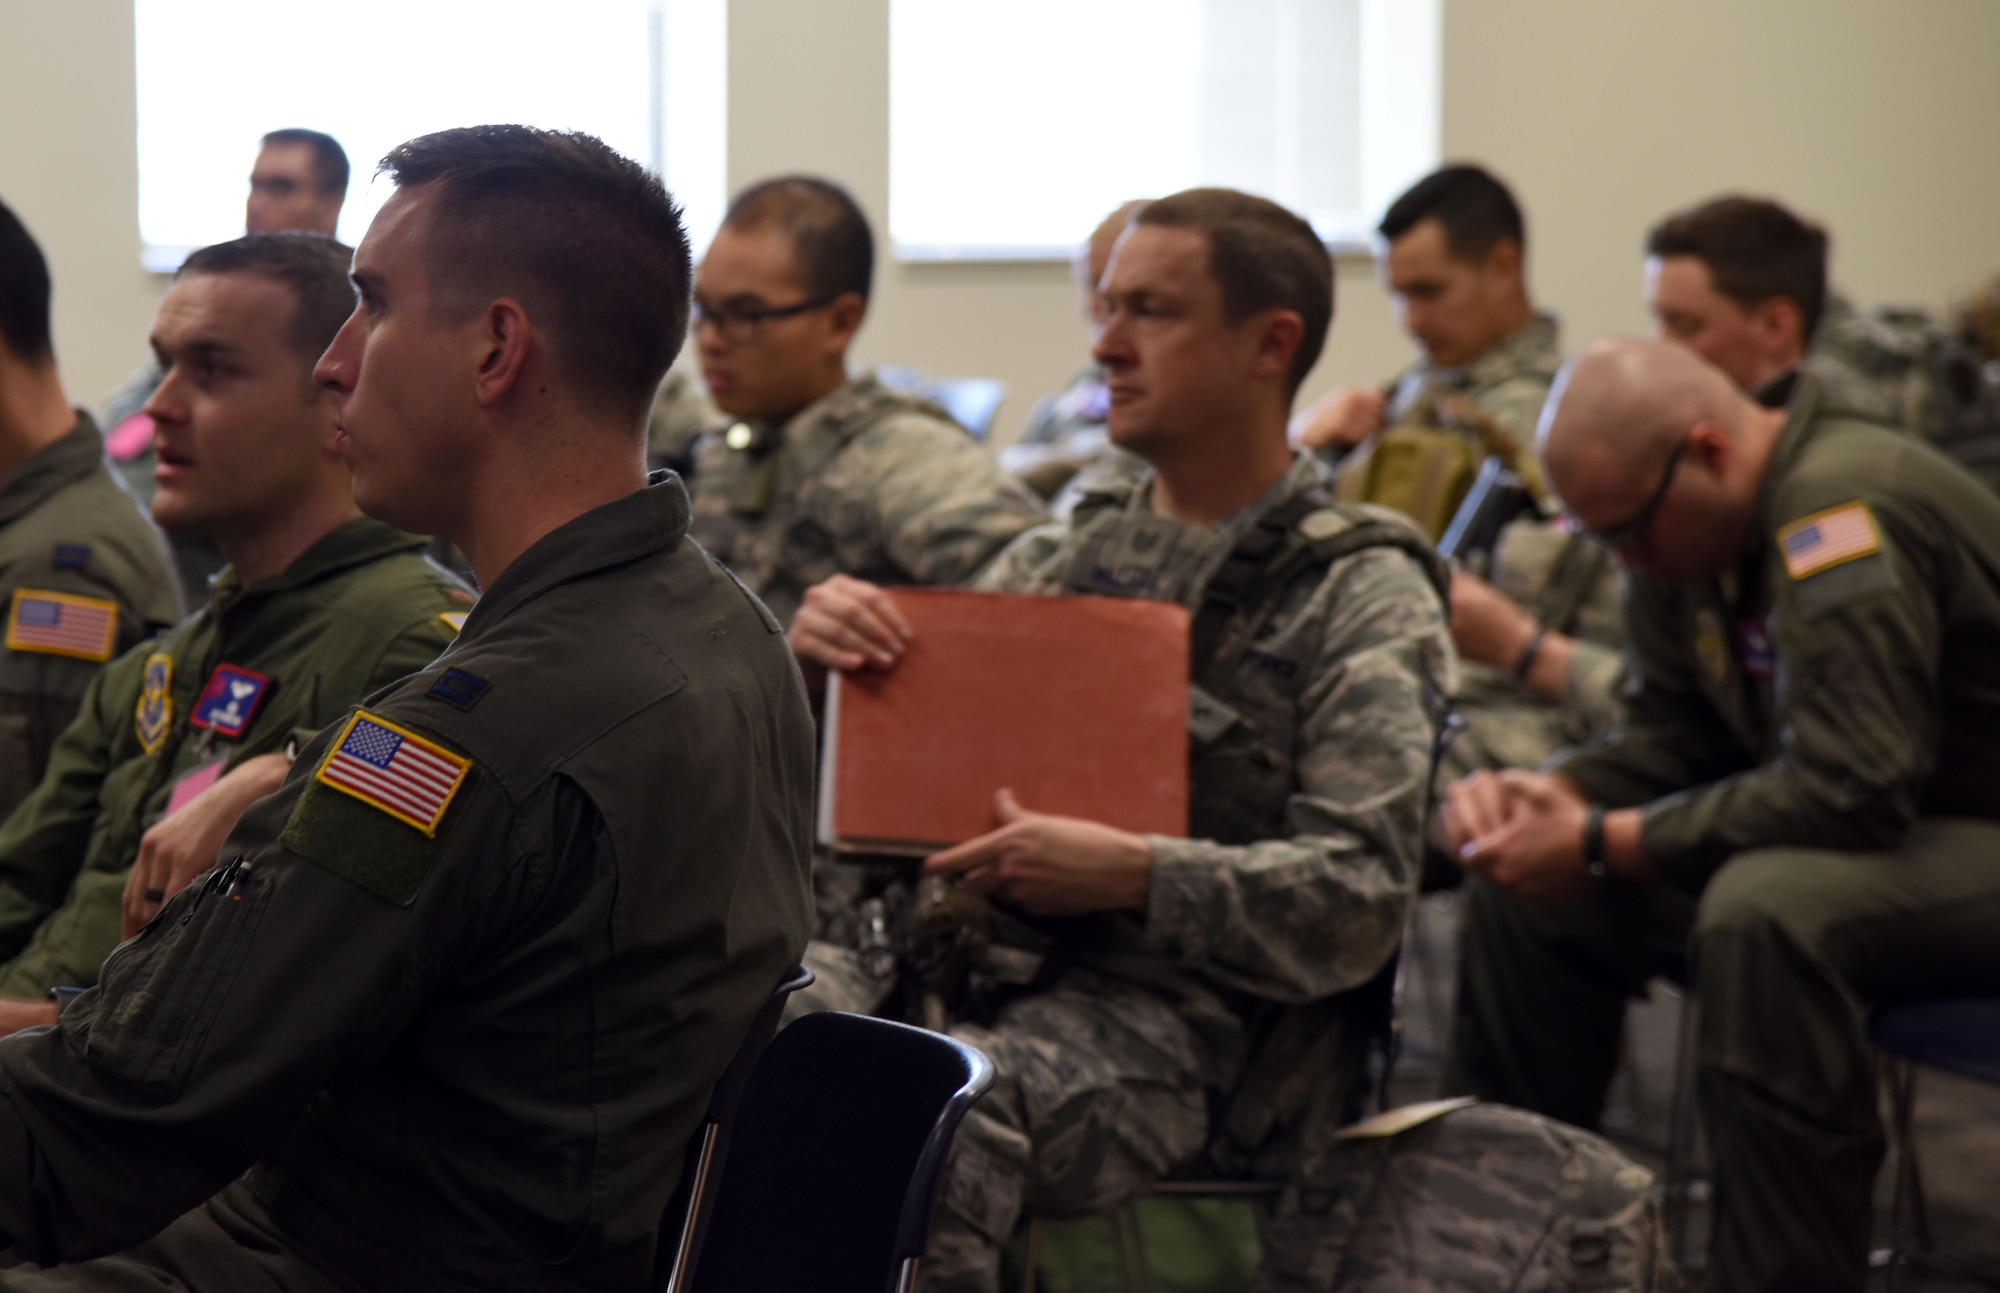 Airmen listen to a briefing during Global Thunder 19, Oct. 31, 2018, at McConnell Air Force Base, Kan. Global Thunder is a globally integrated exercise that provides training opportunities that assess all U.S. Strategic Command (USSTRATCOM) mission areas and joint and field training operational readiness, with a specific focus on nuclear readiness. USSTRATCOM has global responsibilities assigned through the Unified Command Plan that includes strategic deterrence, nuclear operations, space operations, joint electromagnetic spectrum operations, global strike, missile defense, and analysis and targeting. (U.S. Air Force photo by Staff Sgt. Joshua Crawley)